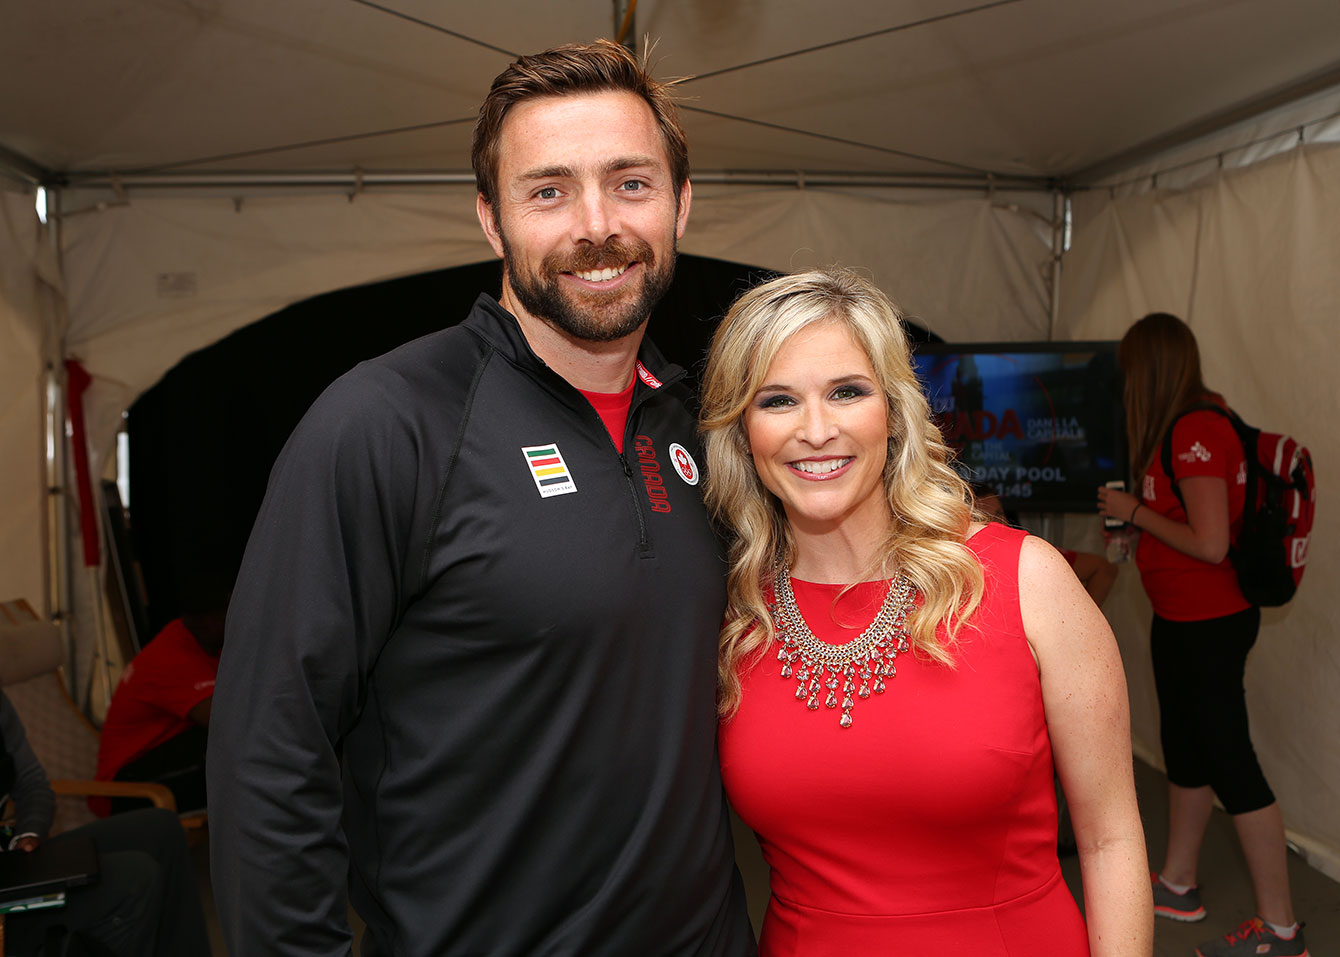 Backstage at Canada Day celebration on Parliament Hill, Mark Oldershaw with Olympic curling champion from Sochi 2014, Jennifer Jones, on July 1, 2015 (Greg Kolz for Canadian Olympic Team). 